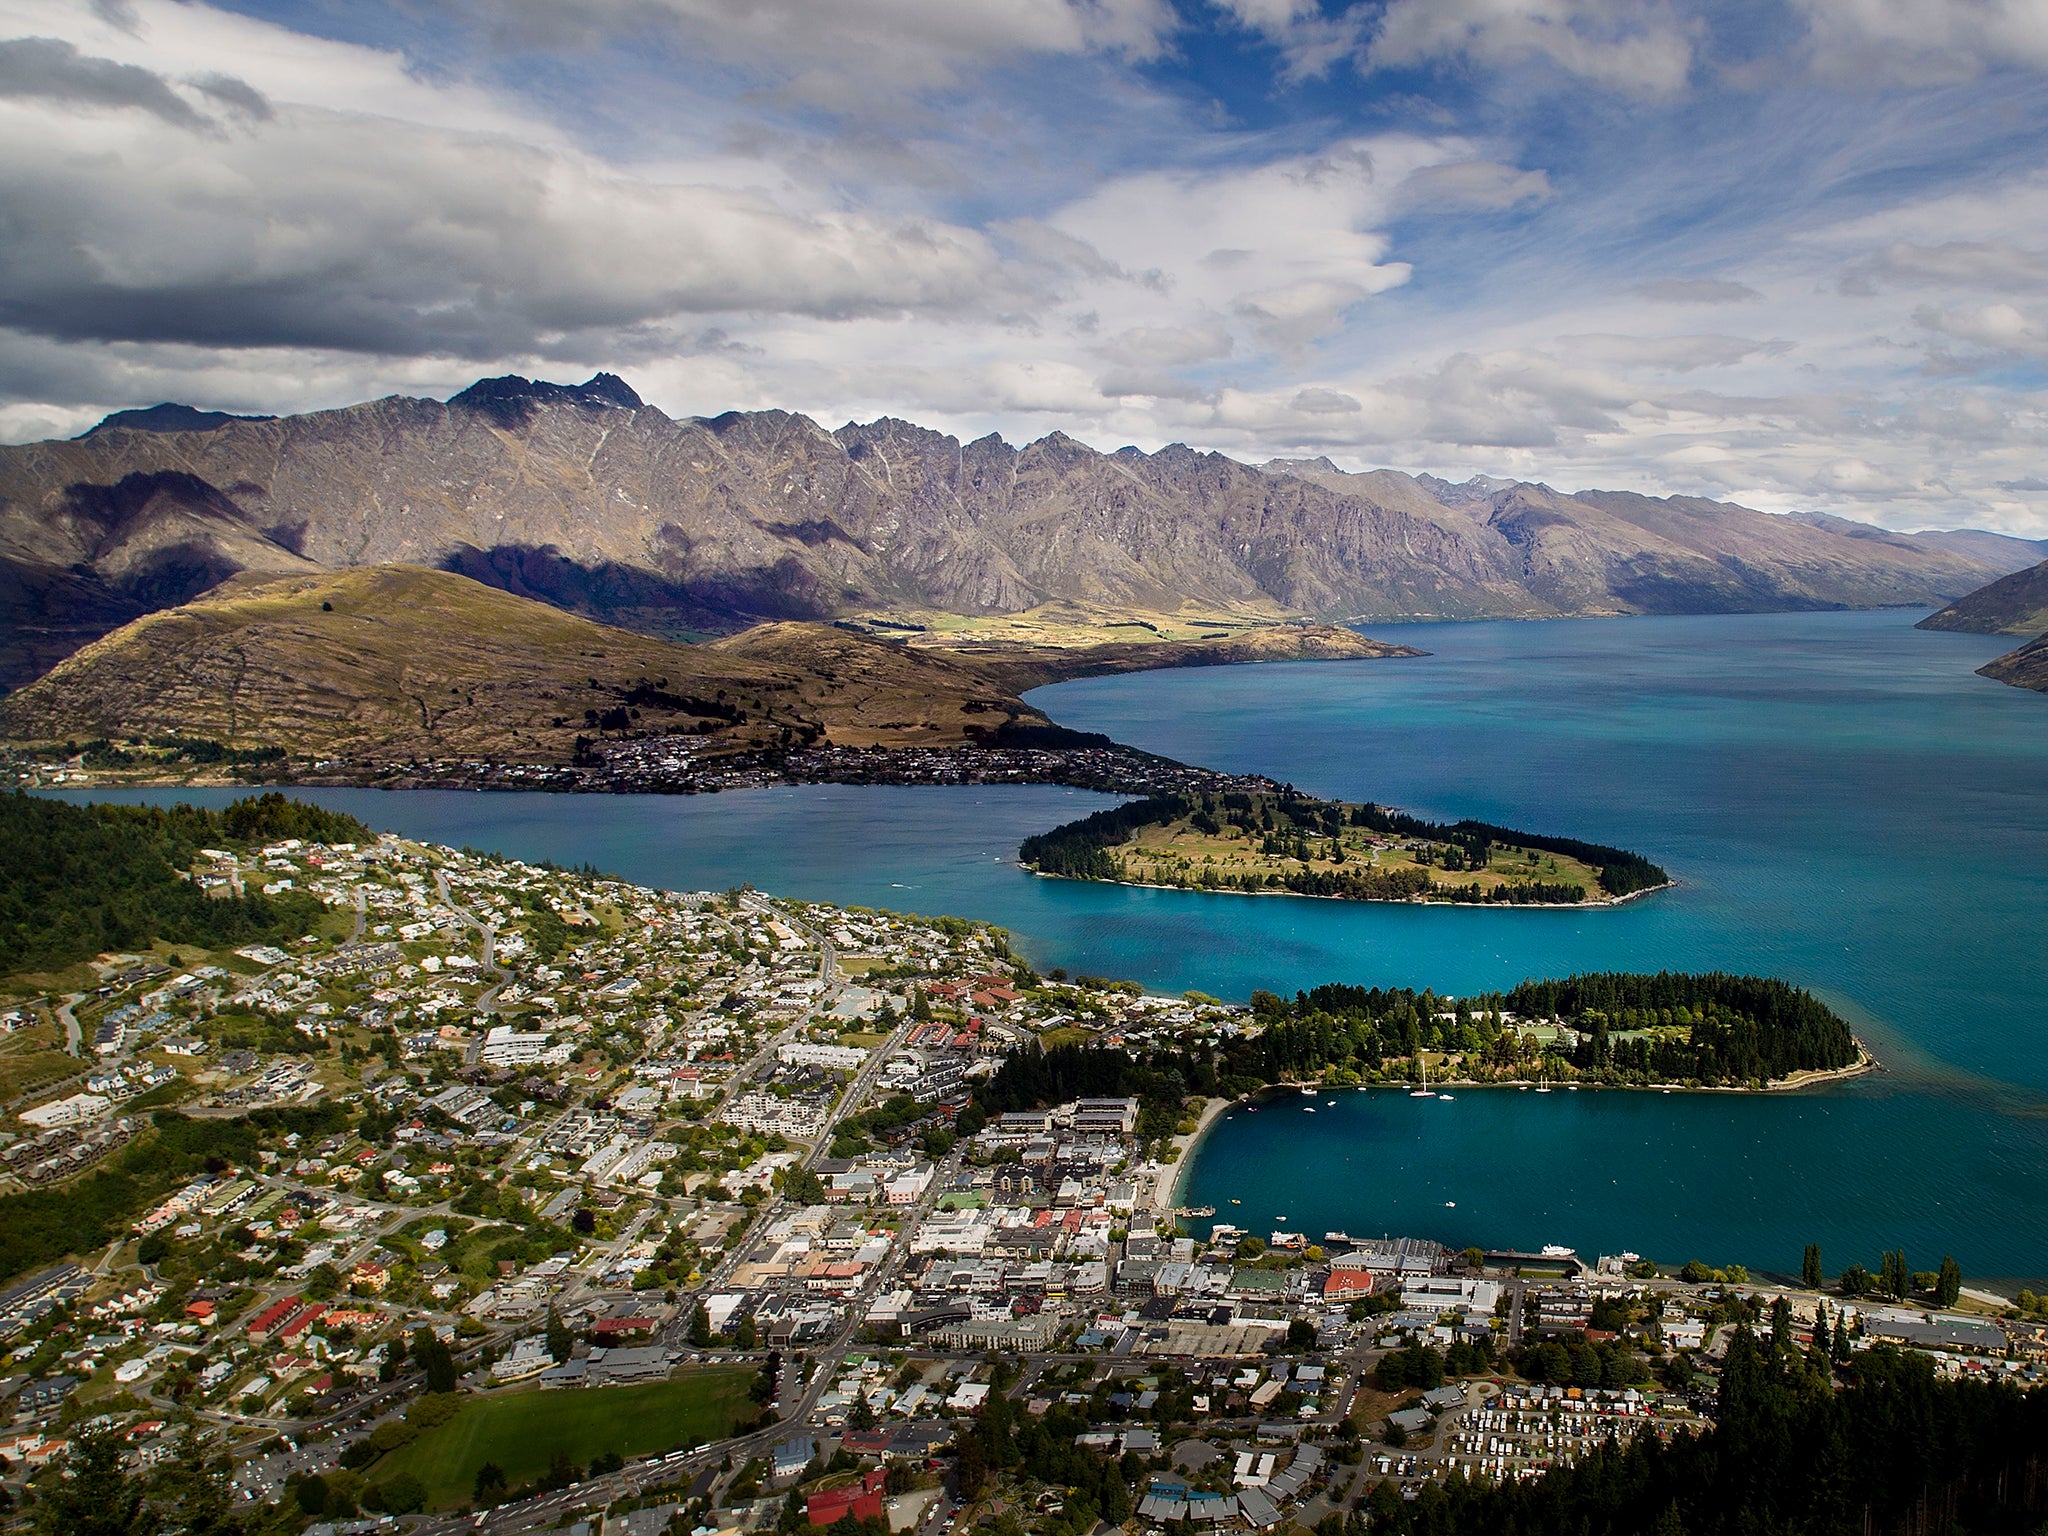 The city of Queenstown on the shores of Lake Wakatipu with the Remarkables mountain range in the background.